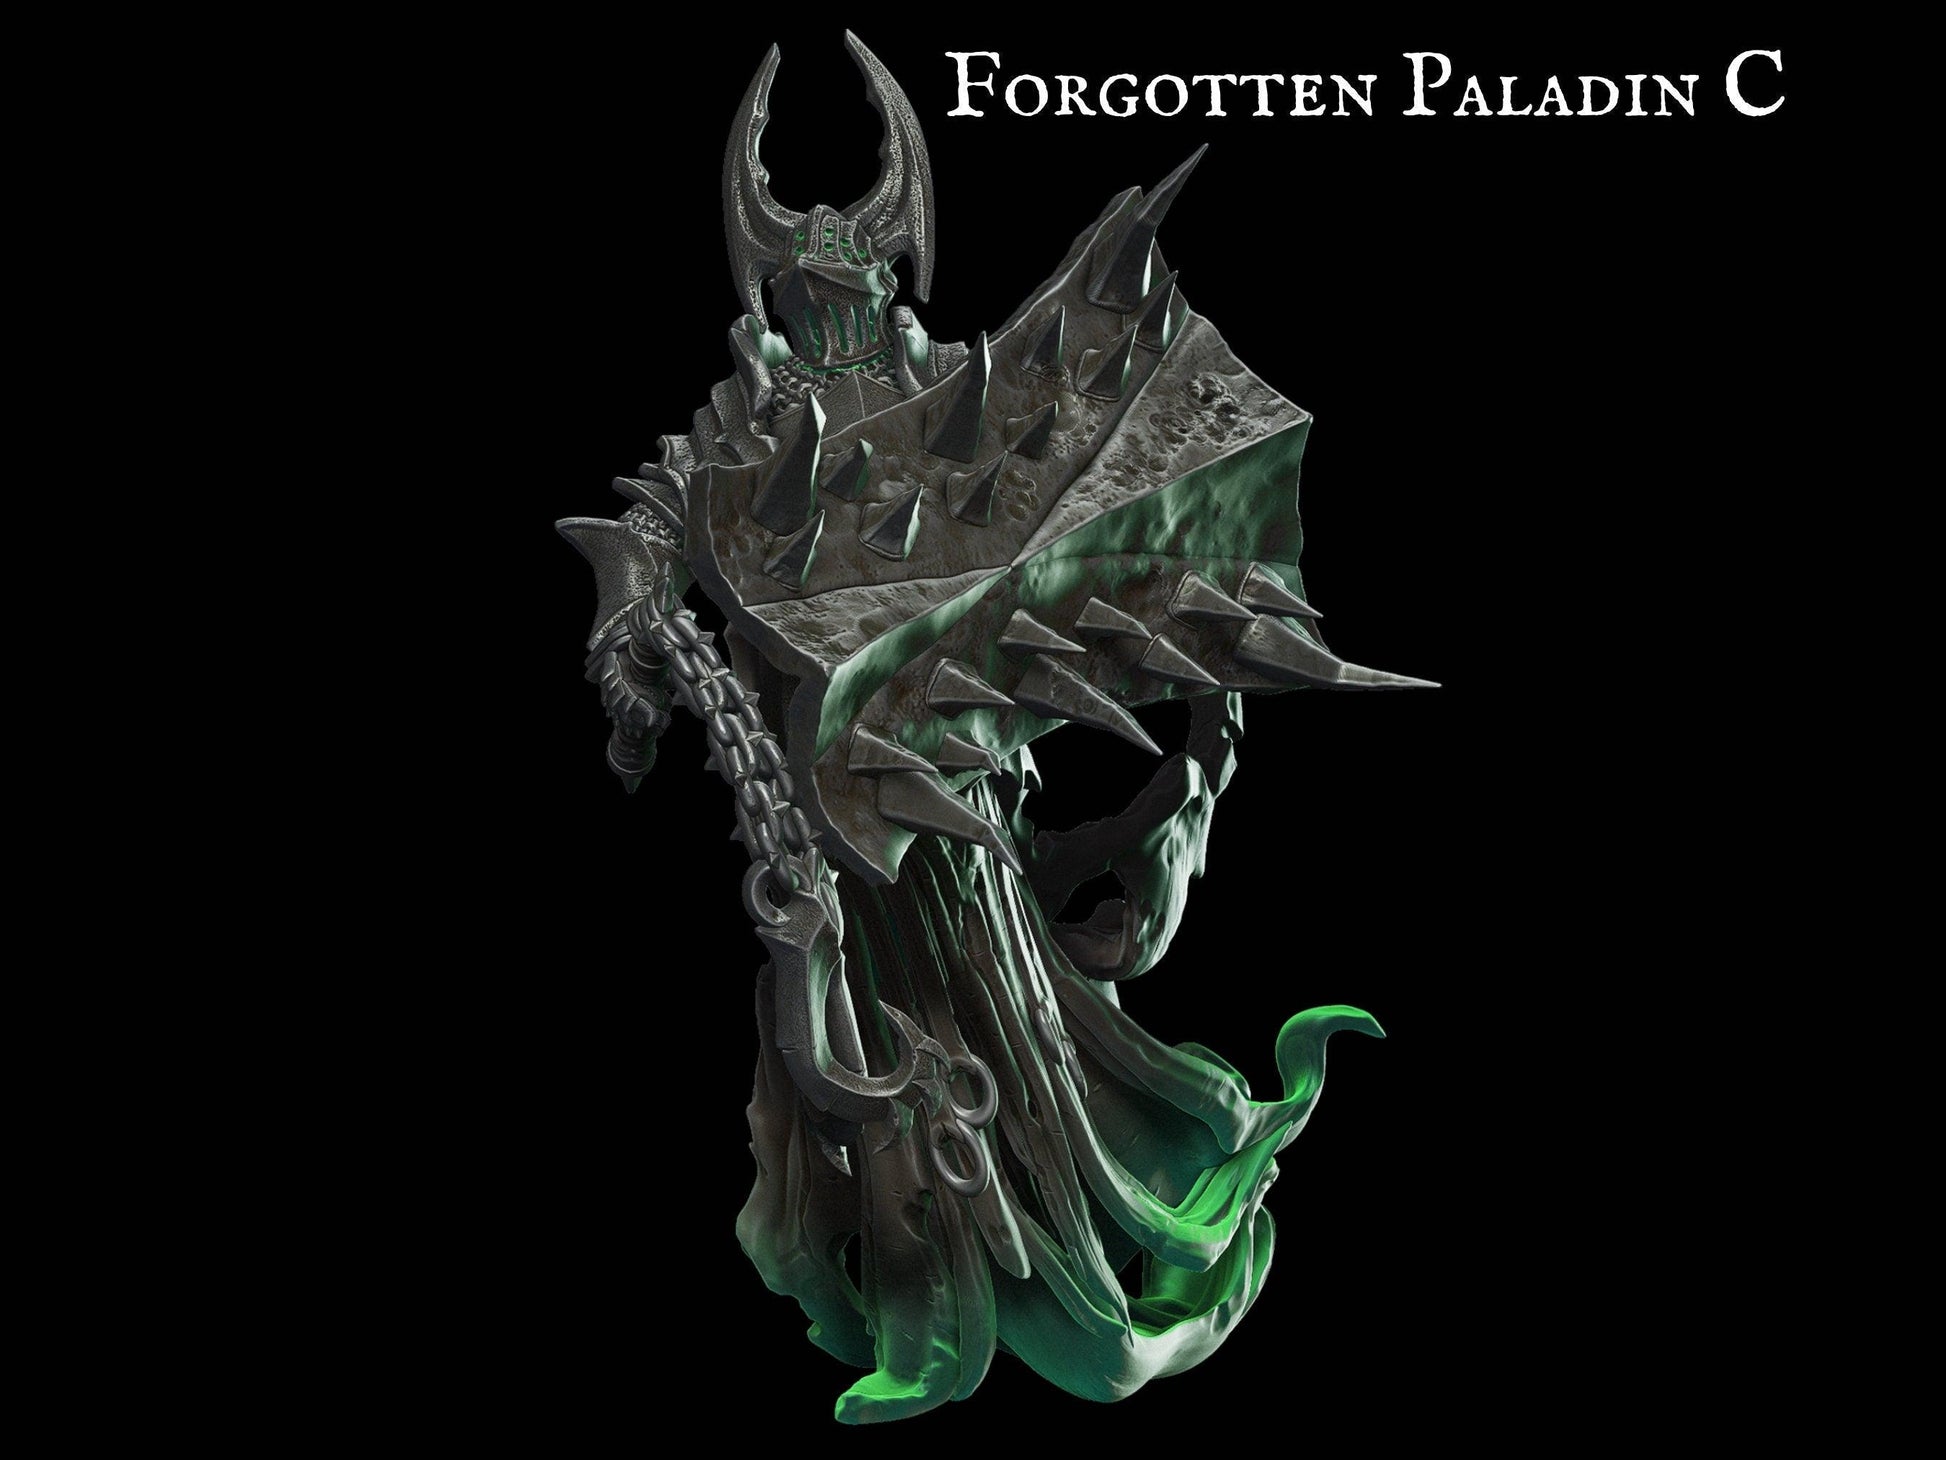 Forgotten Paladin Miniature Monster Miniature | 28mm scale Tabletop gaming DnD Miniature Dungeons and Dragons dnd 5e dungeon master gift demon - Plague Miniatures shop for DnD Miniatures